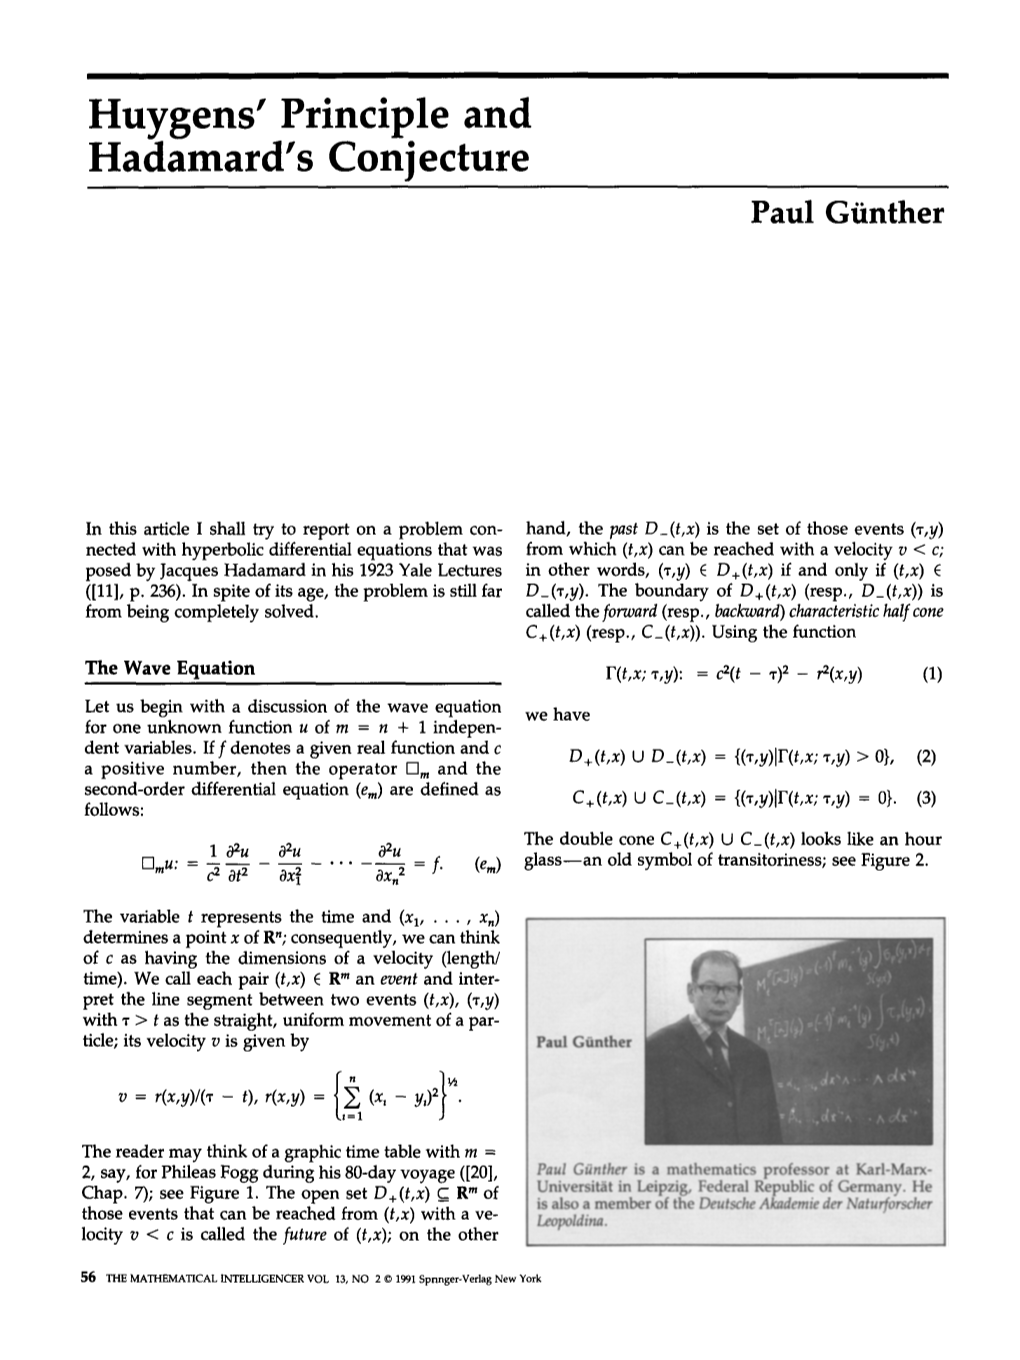 Huygens' Principle and Hadamard's Conjecture Paul Giinther